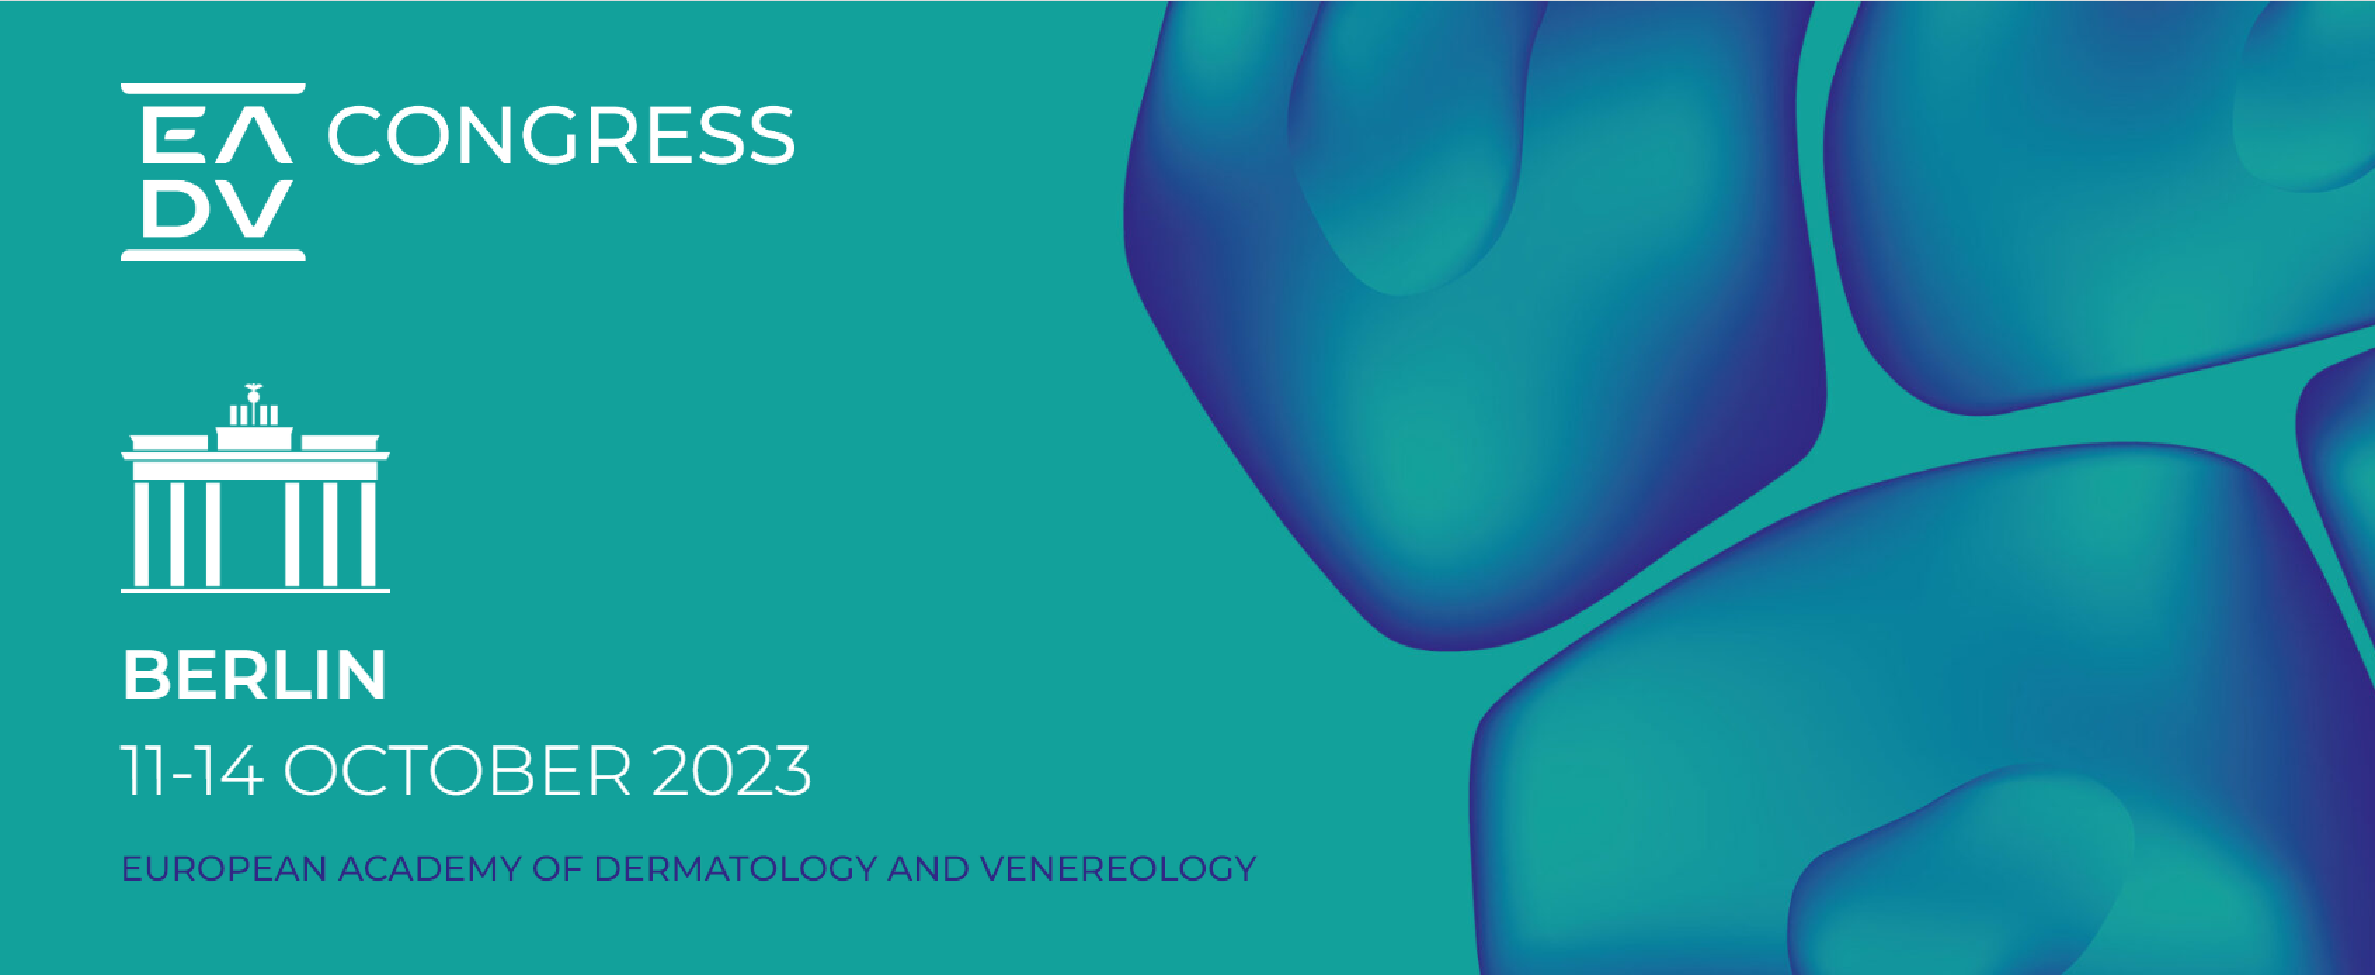 32nd Congress of the European Academy of Dermatology and Venereology - EADV 2023